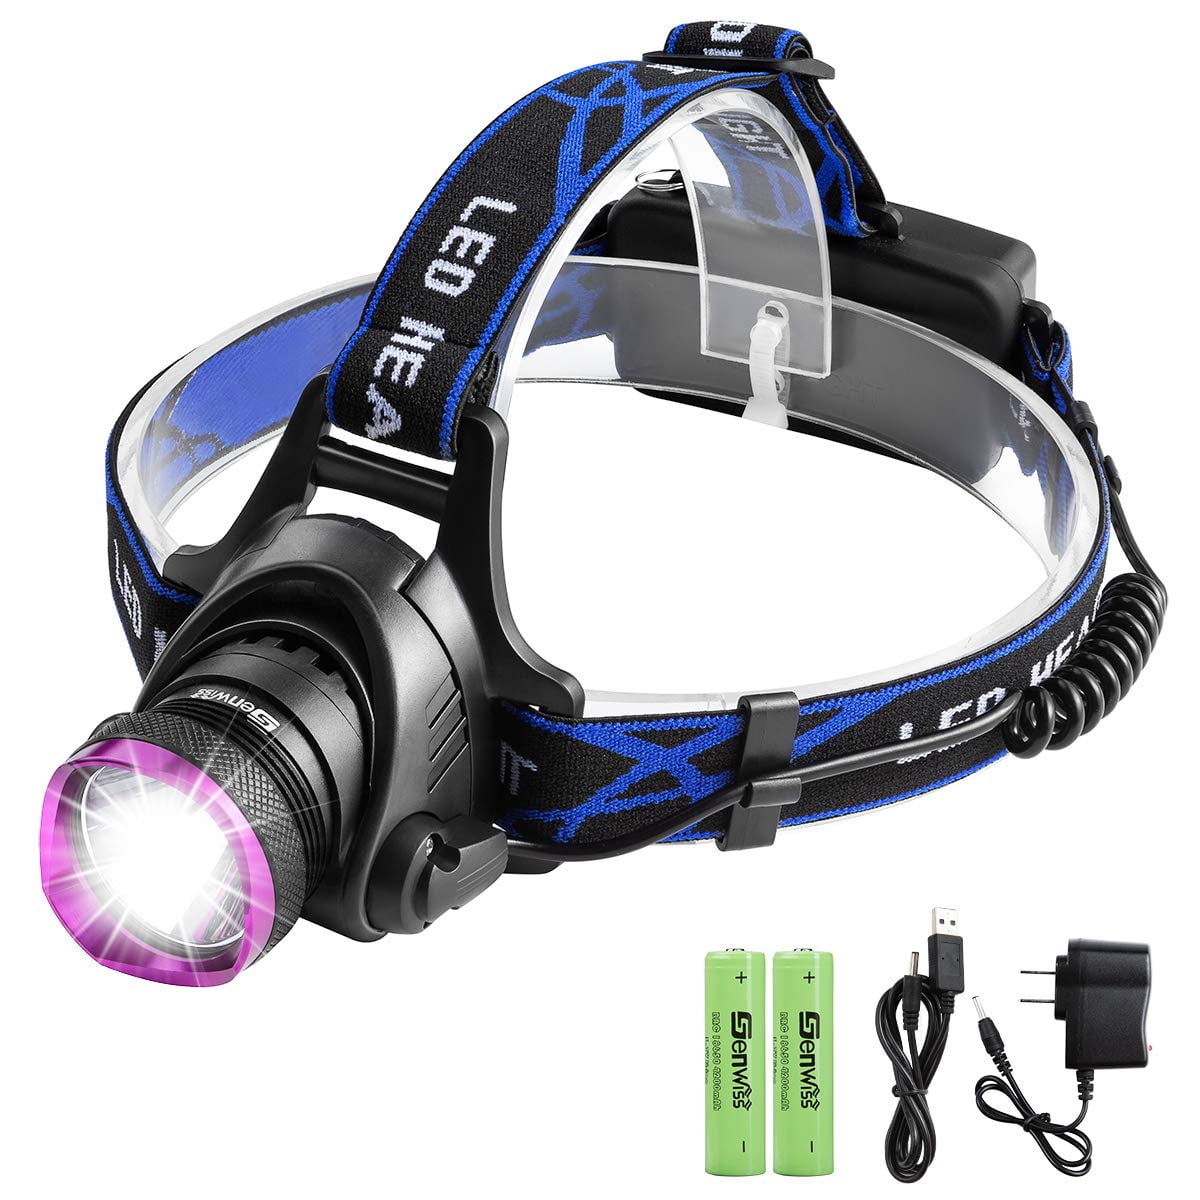 IMAGE Headlamp 4 Lighting Modes Super Bright 1800 lumens LED Waterproof Head Torch Headlight,Adjustable Head Flashlights with 2 Pack 18650 Rechargeable Battery for Camping Hiking Fishing Running 